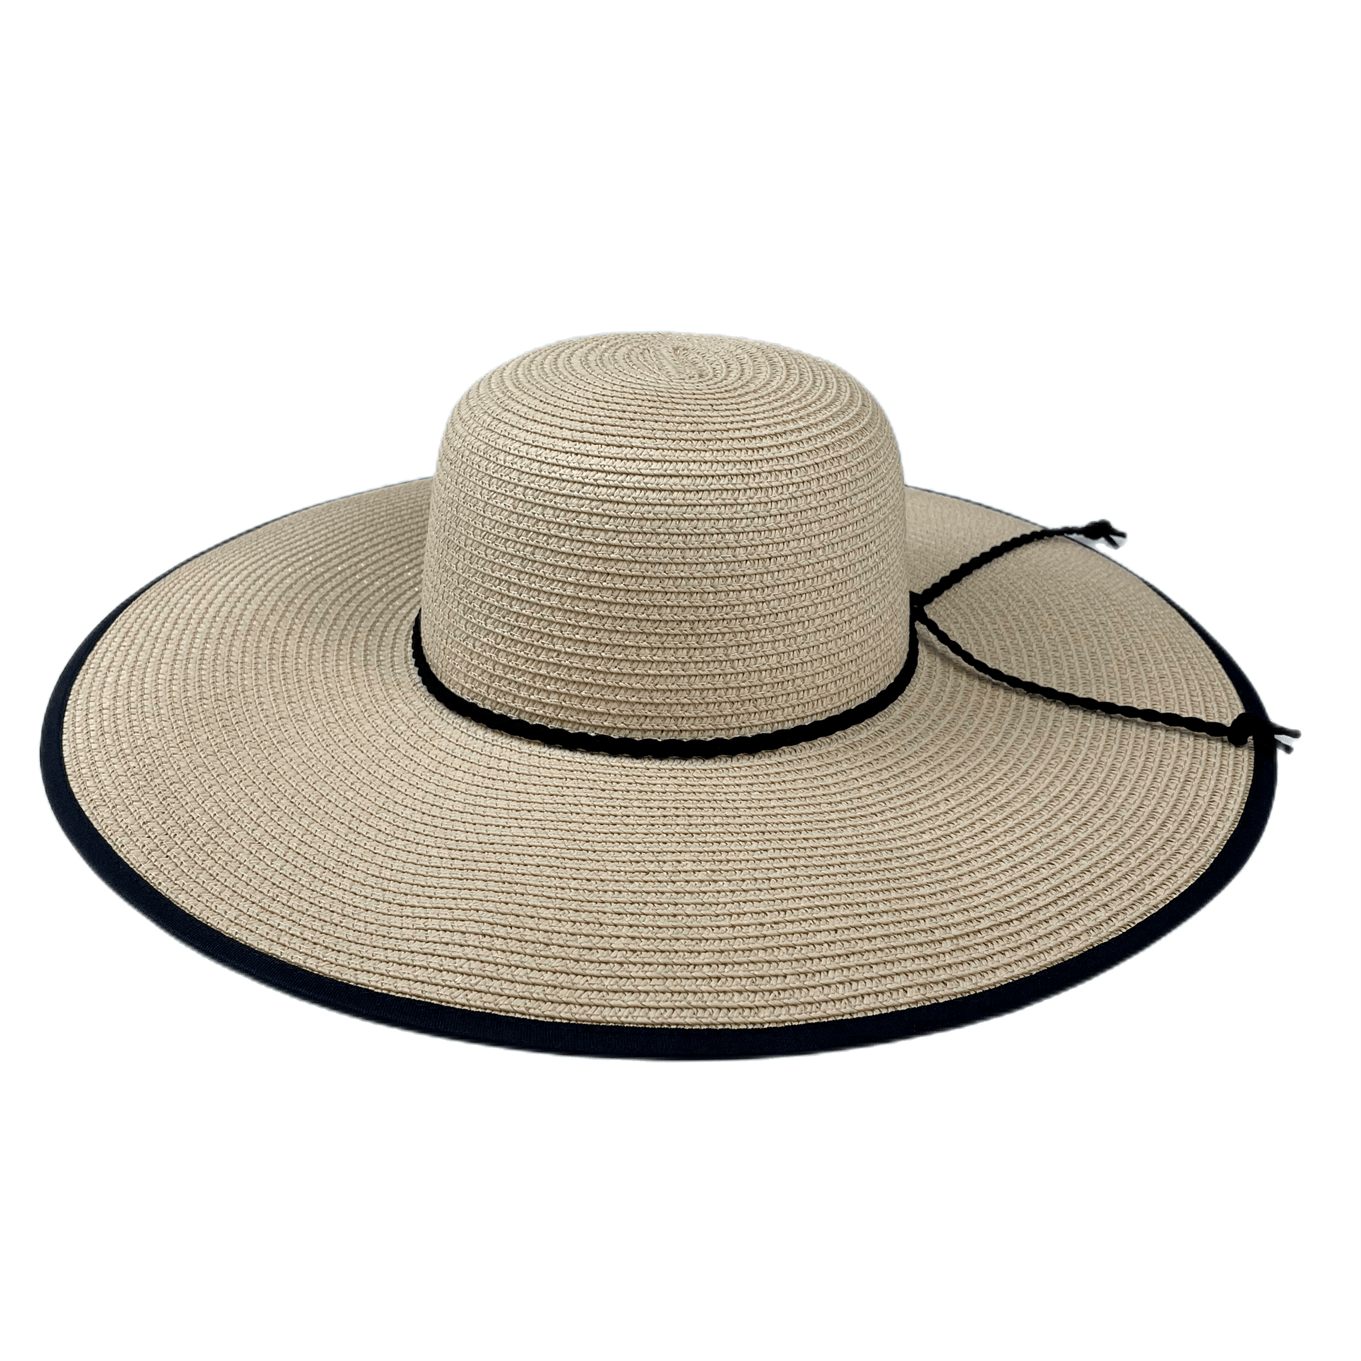 Stay Protected in Style: Foldable Wide Brim Sunshade Floppy Hat for Summer Travel & Hiking